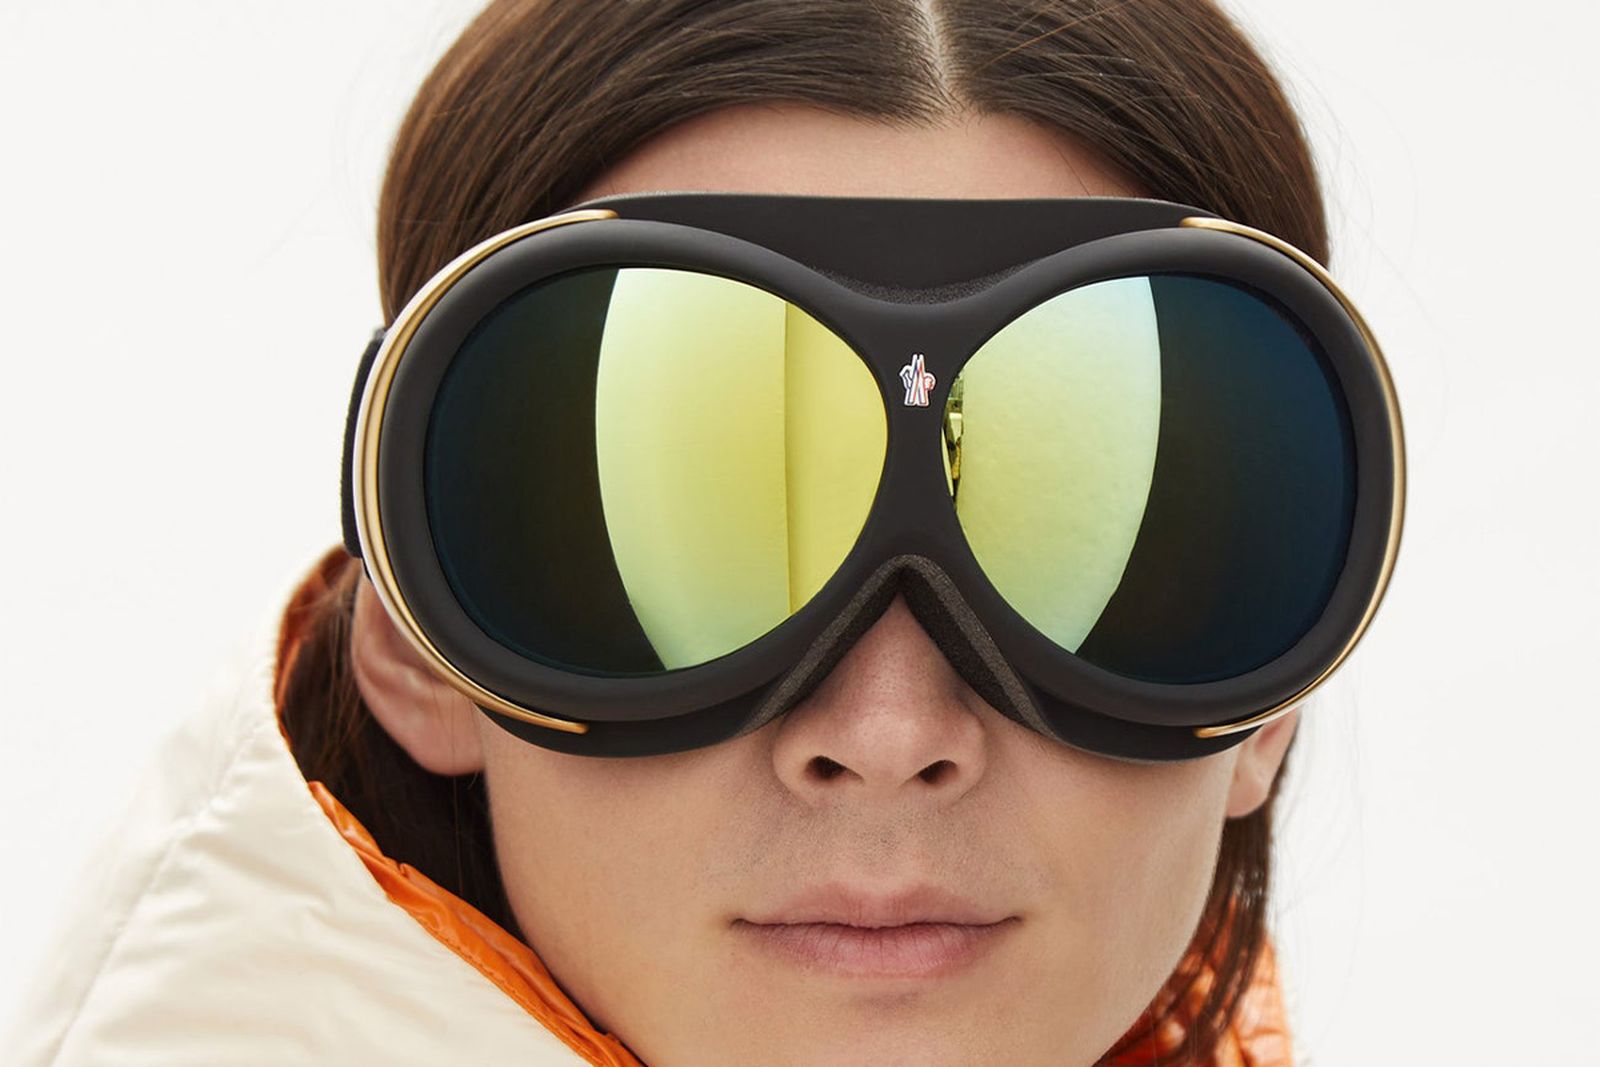 Shop Best Ski Goggles to in 2022